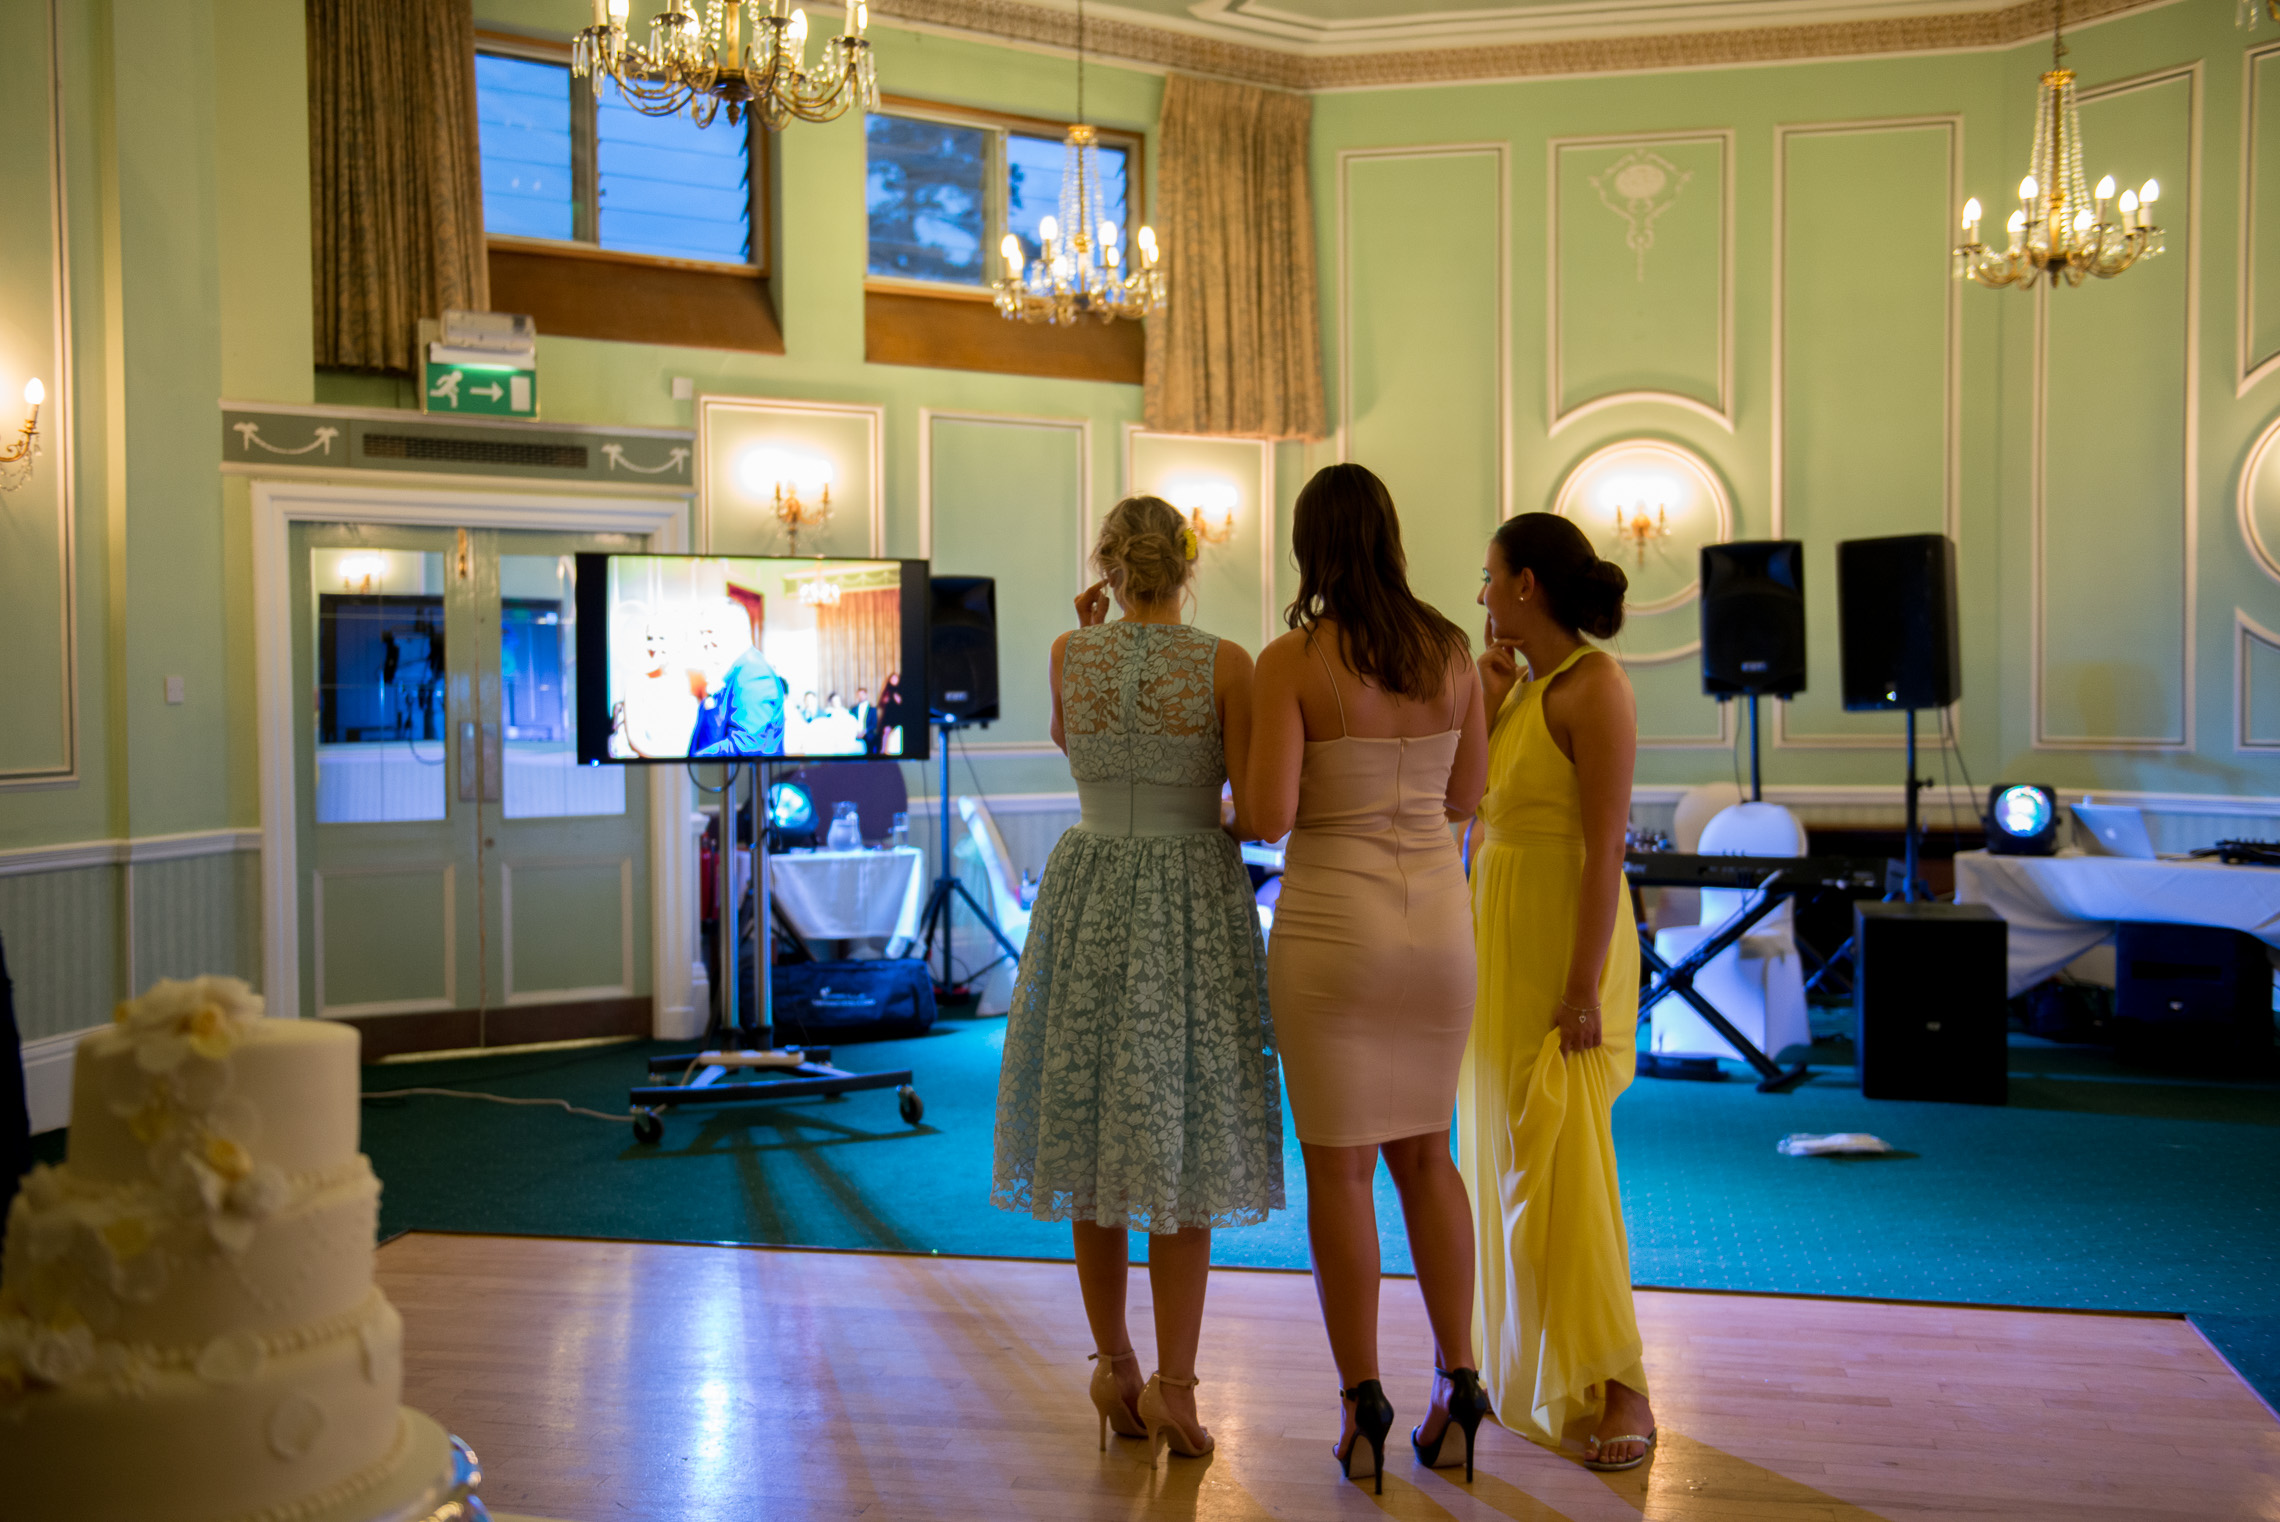 Guests look on at some of the pictures during the day